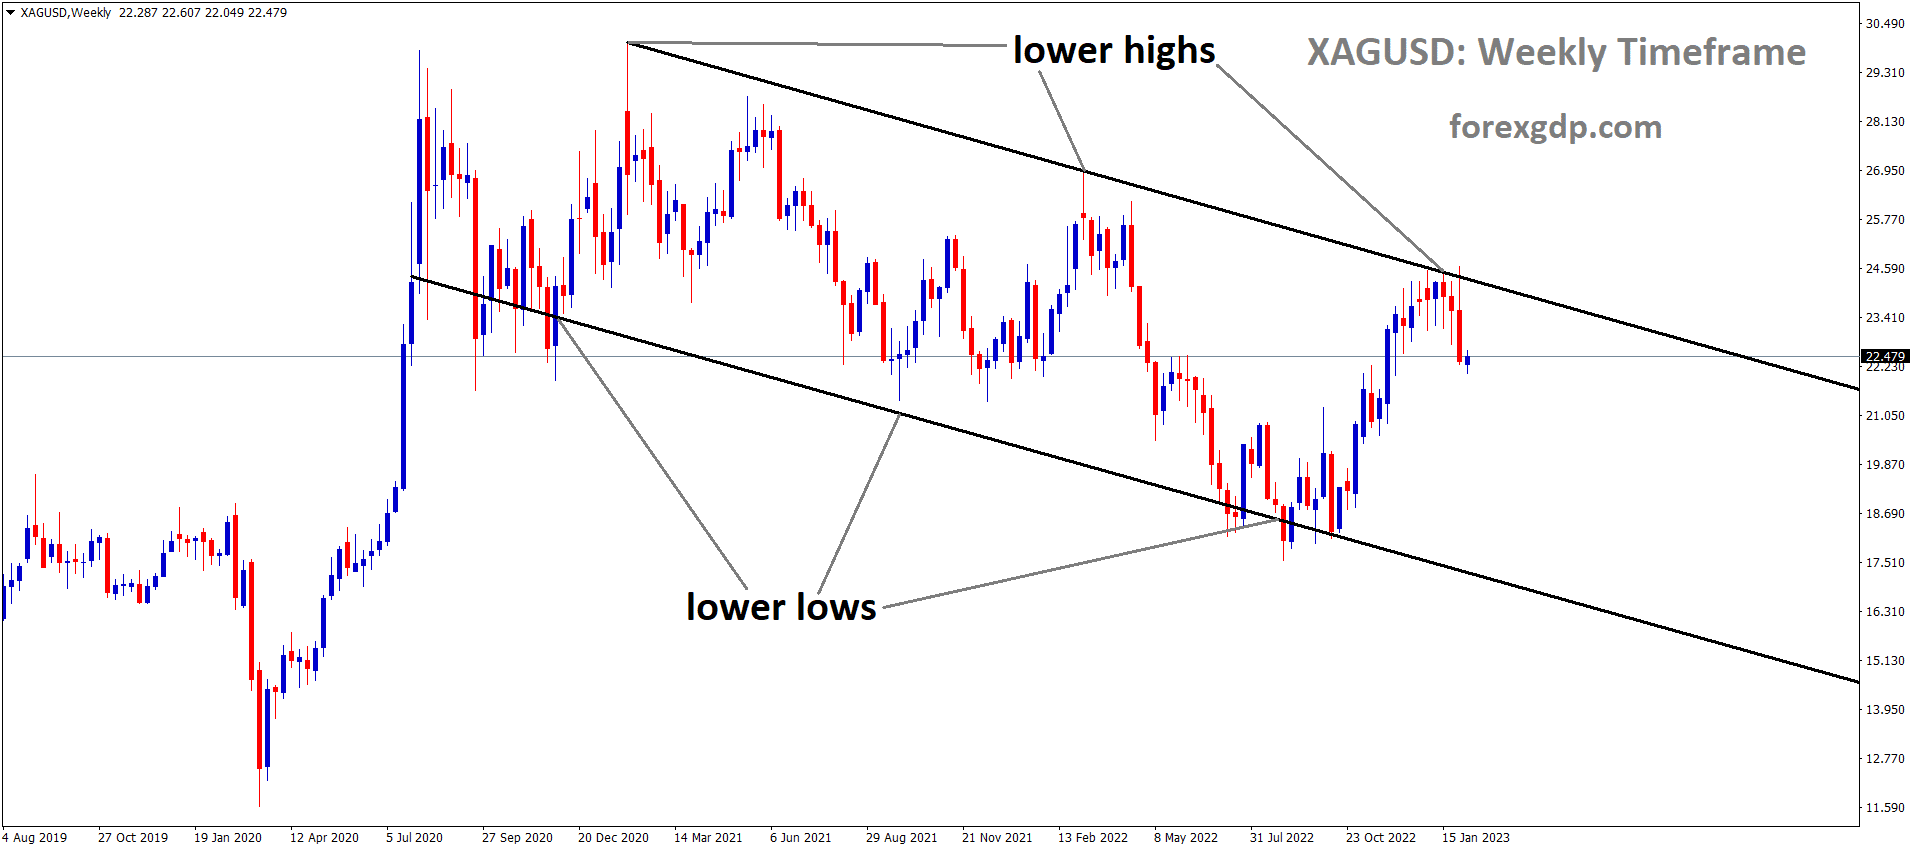 XAGUSD Silver Price is moving in the Descending channel and the market has fallen from the lower high area of the channel